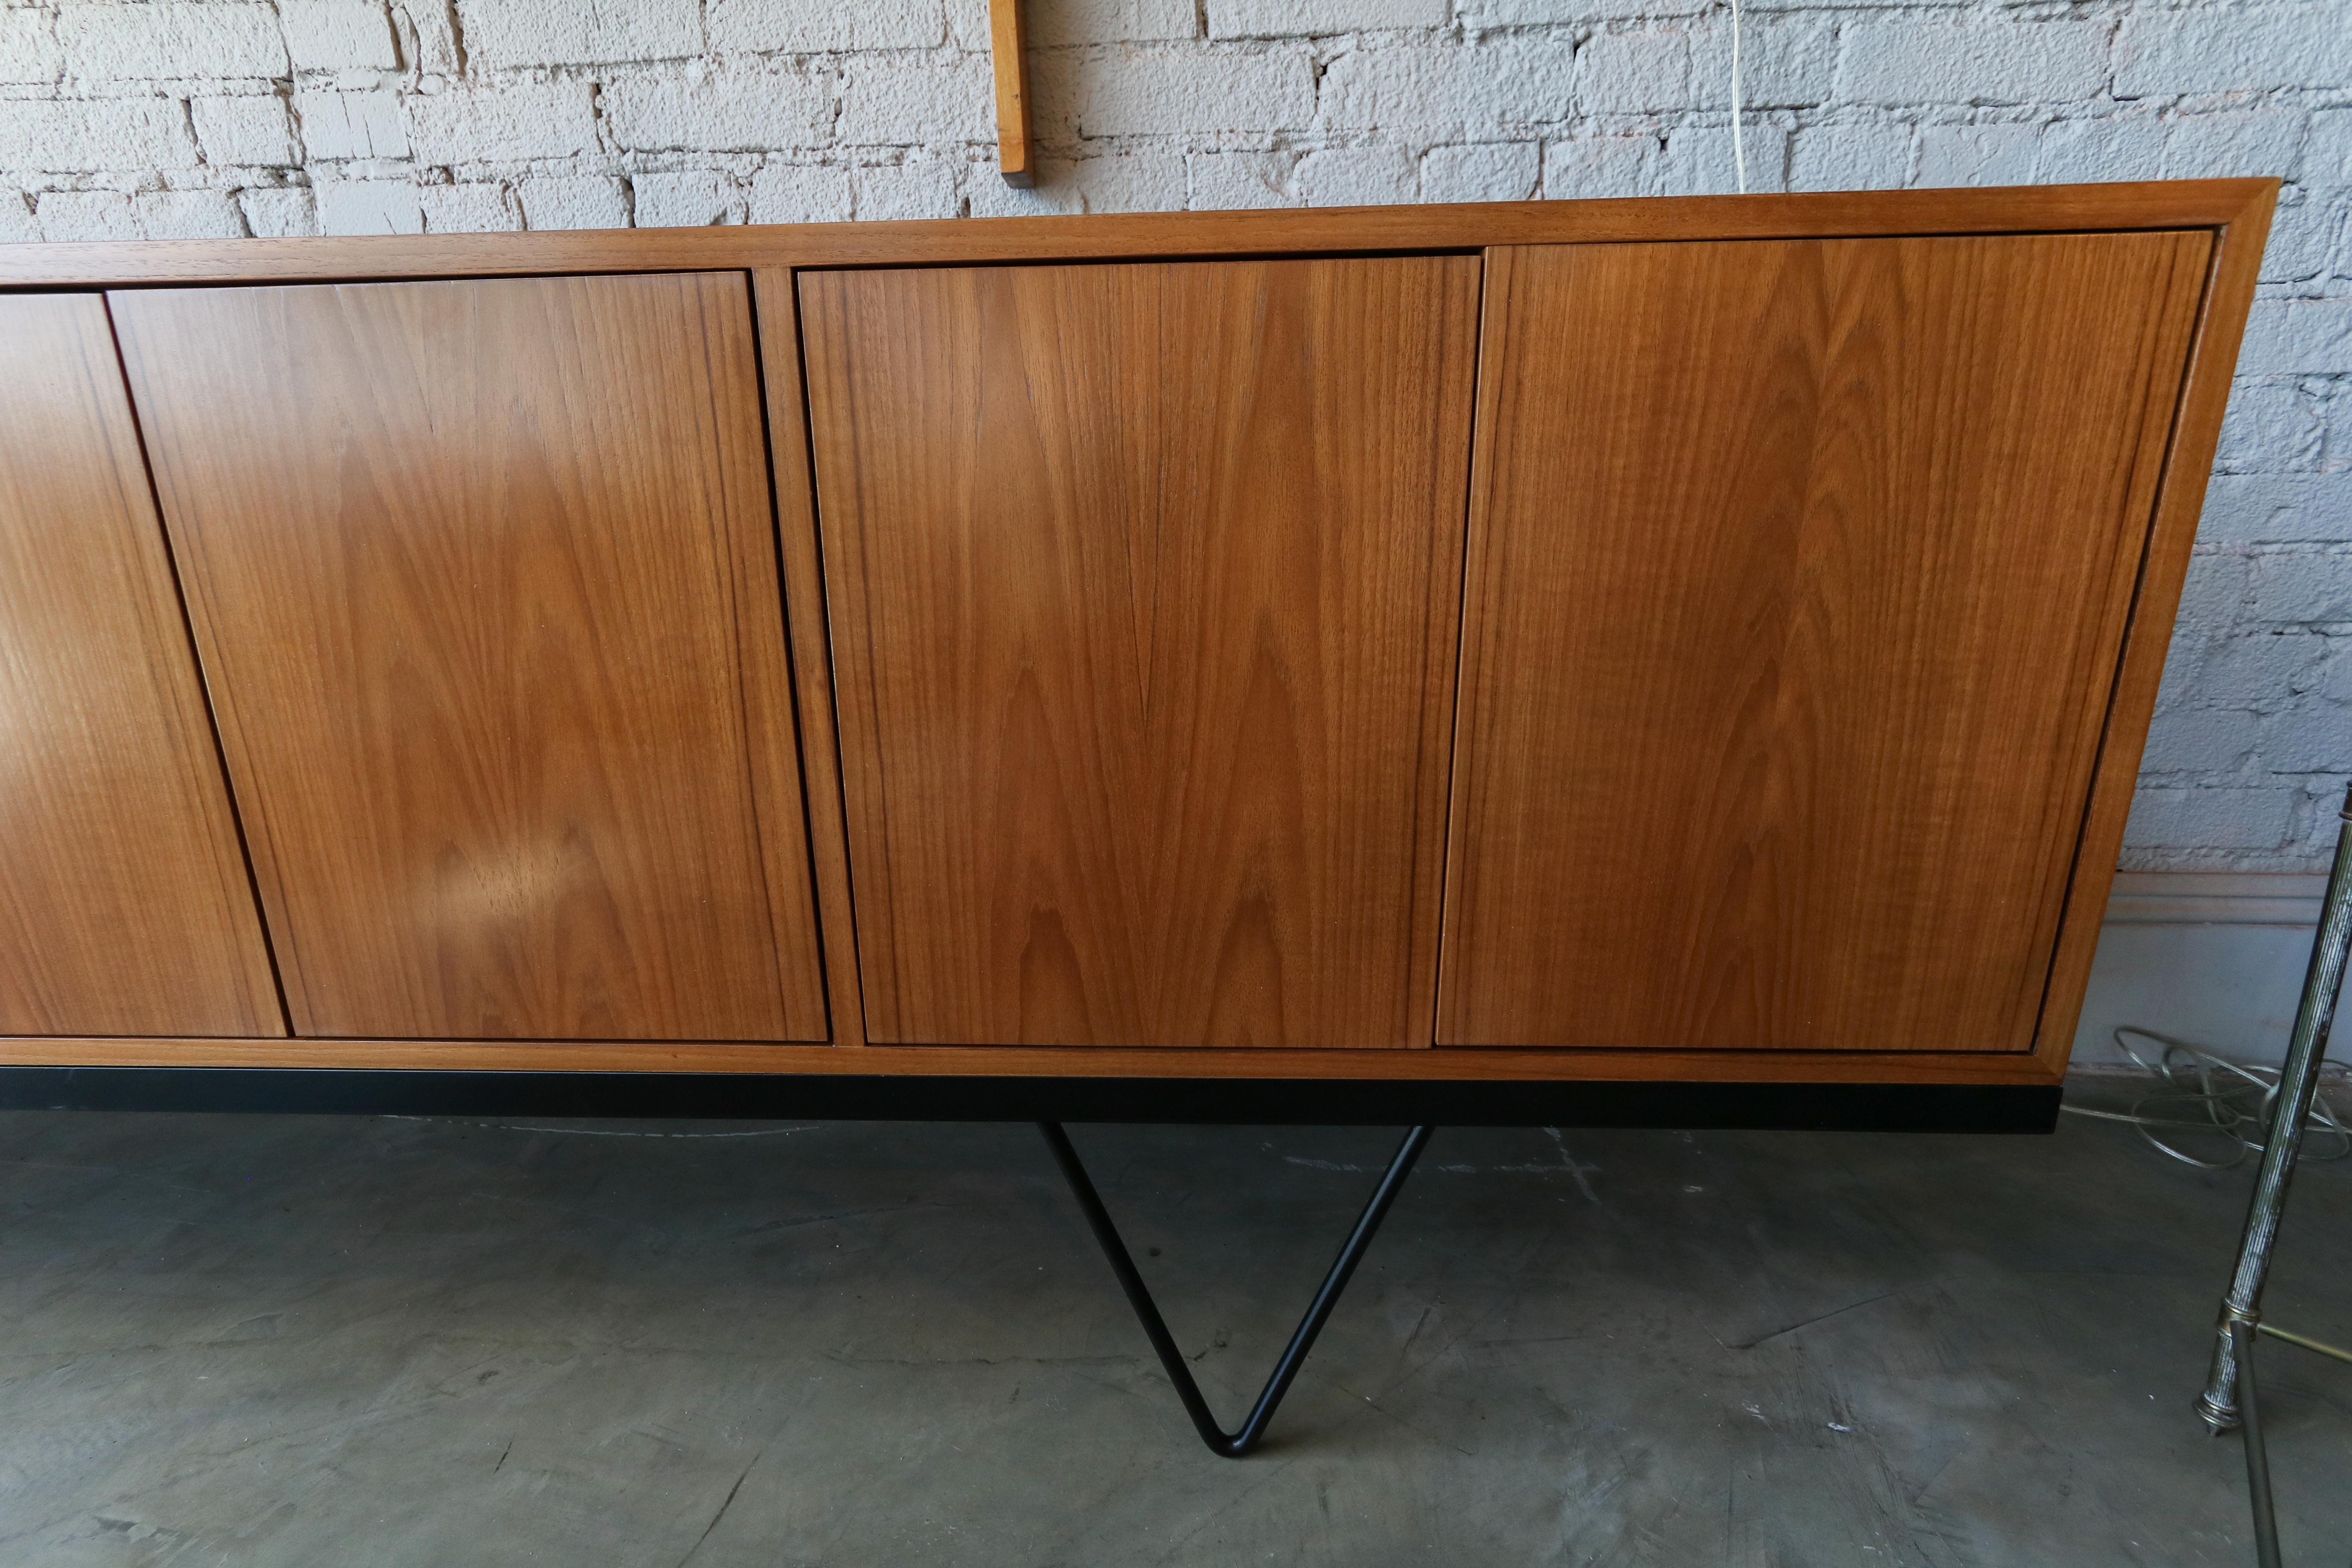 Custom Midcentury Style Teak Sideboard with Black Metal Base by Adesso Imports For Sale 1